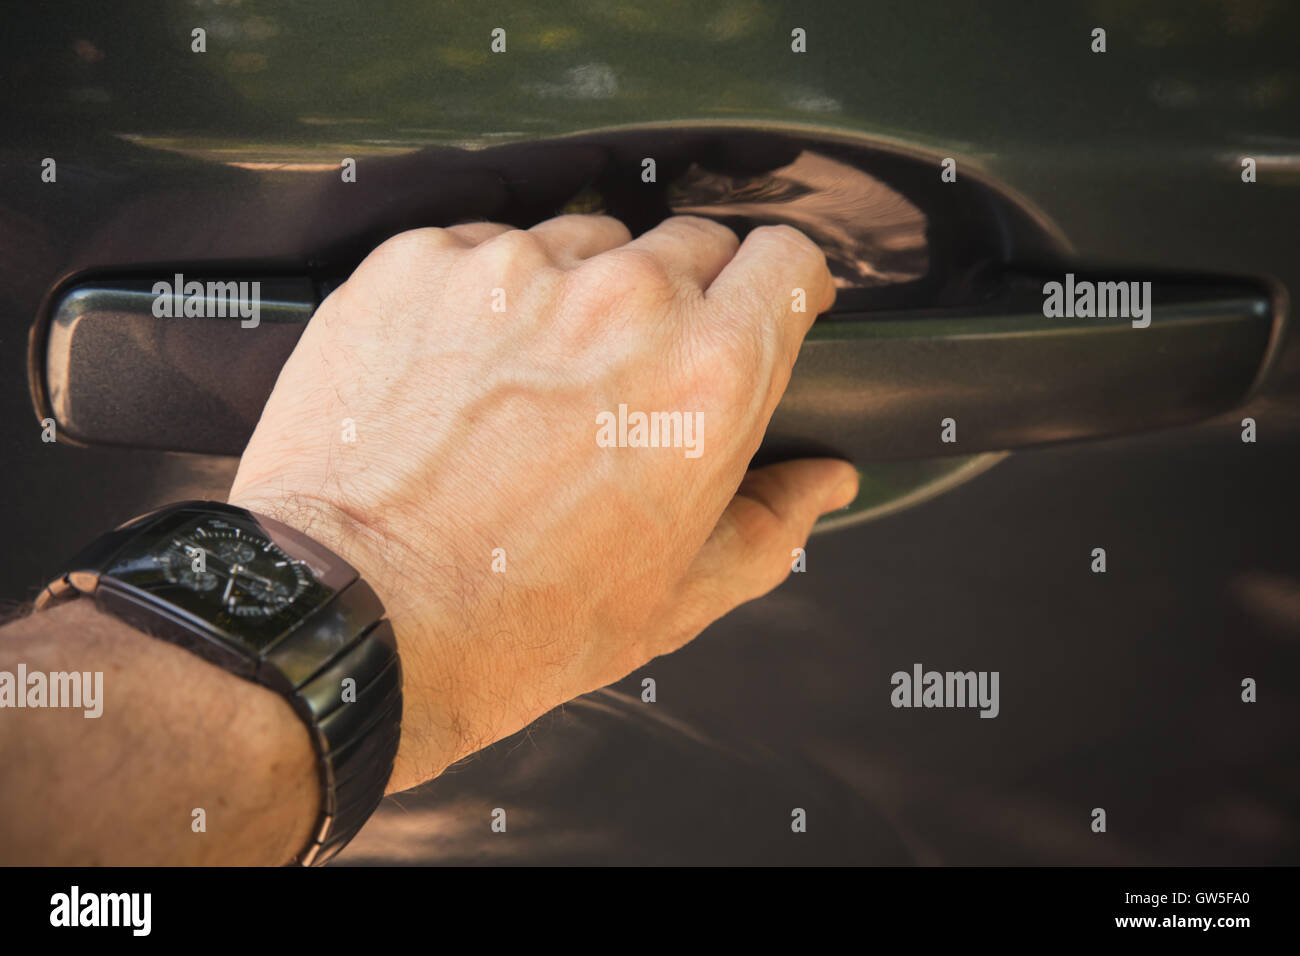 Male hand with wrist watch opens car door, closeup photo with selective focus Stock Photo